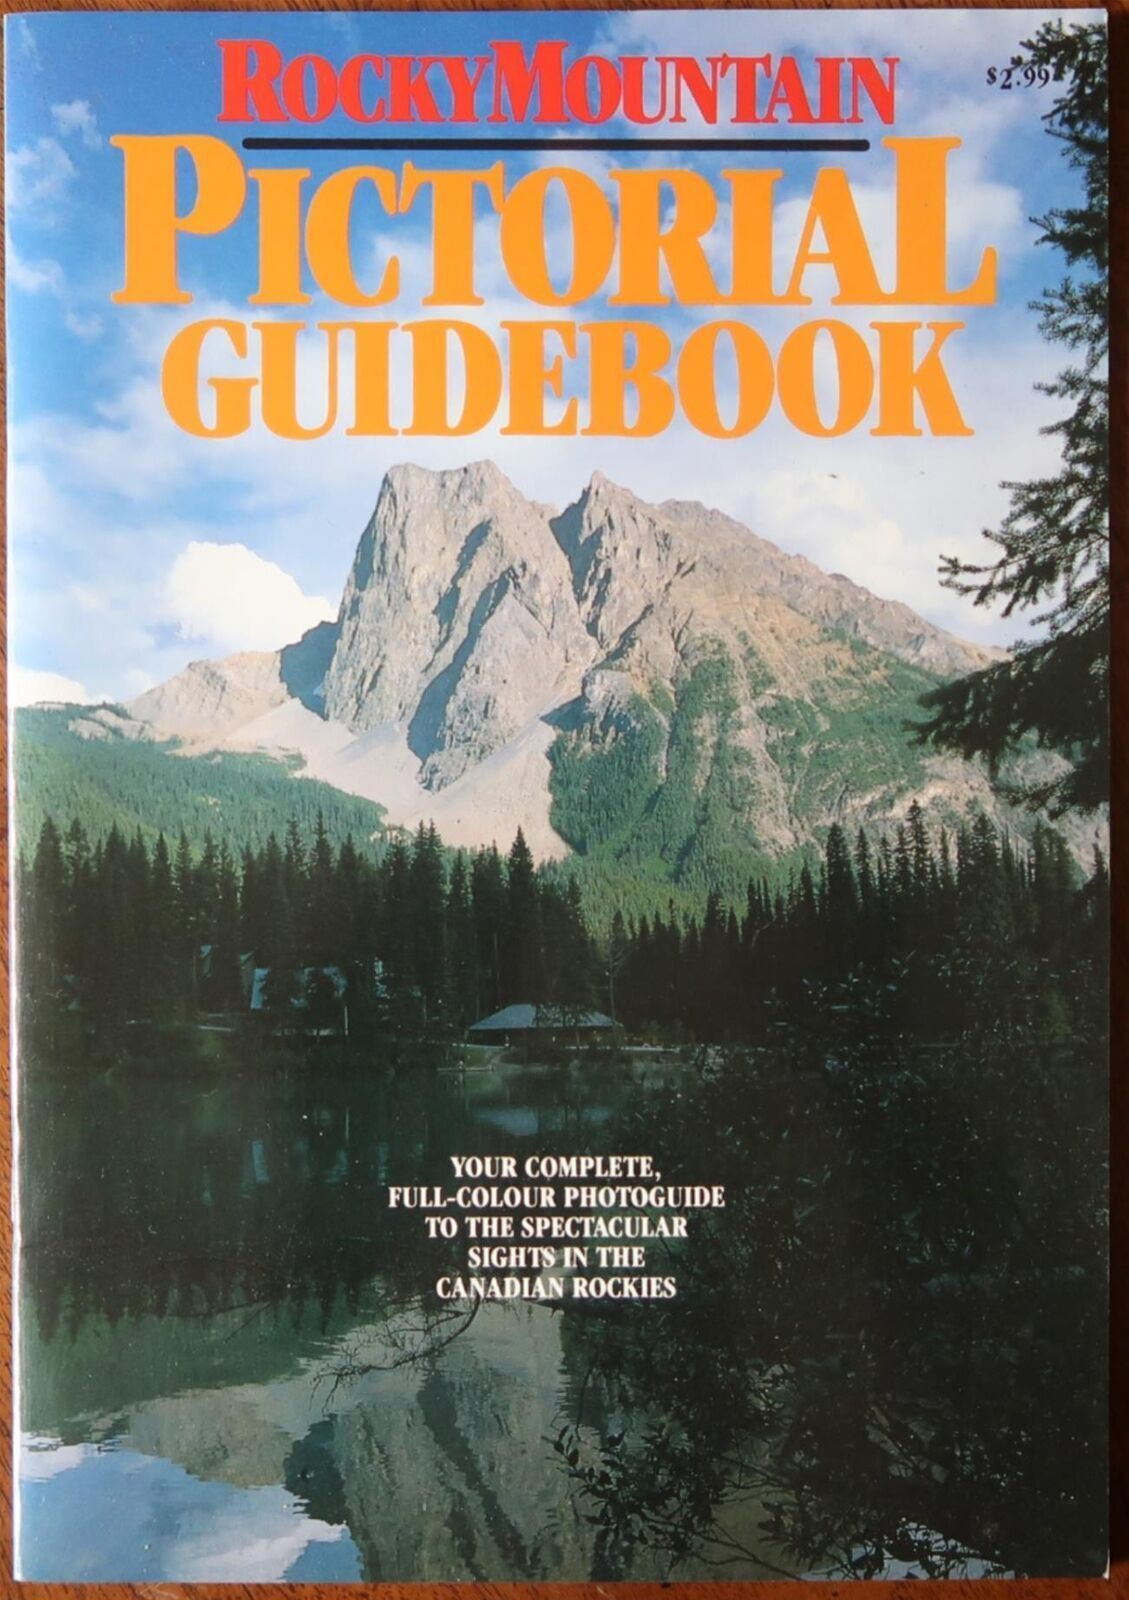 VINTAGE ROCKY MOUNTAIN PICTORIAL GUIDEBOOK FULL COLOUR PHOTOGUIDE 24 PG M1-106